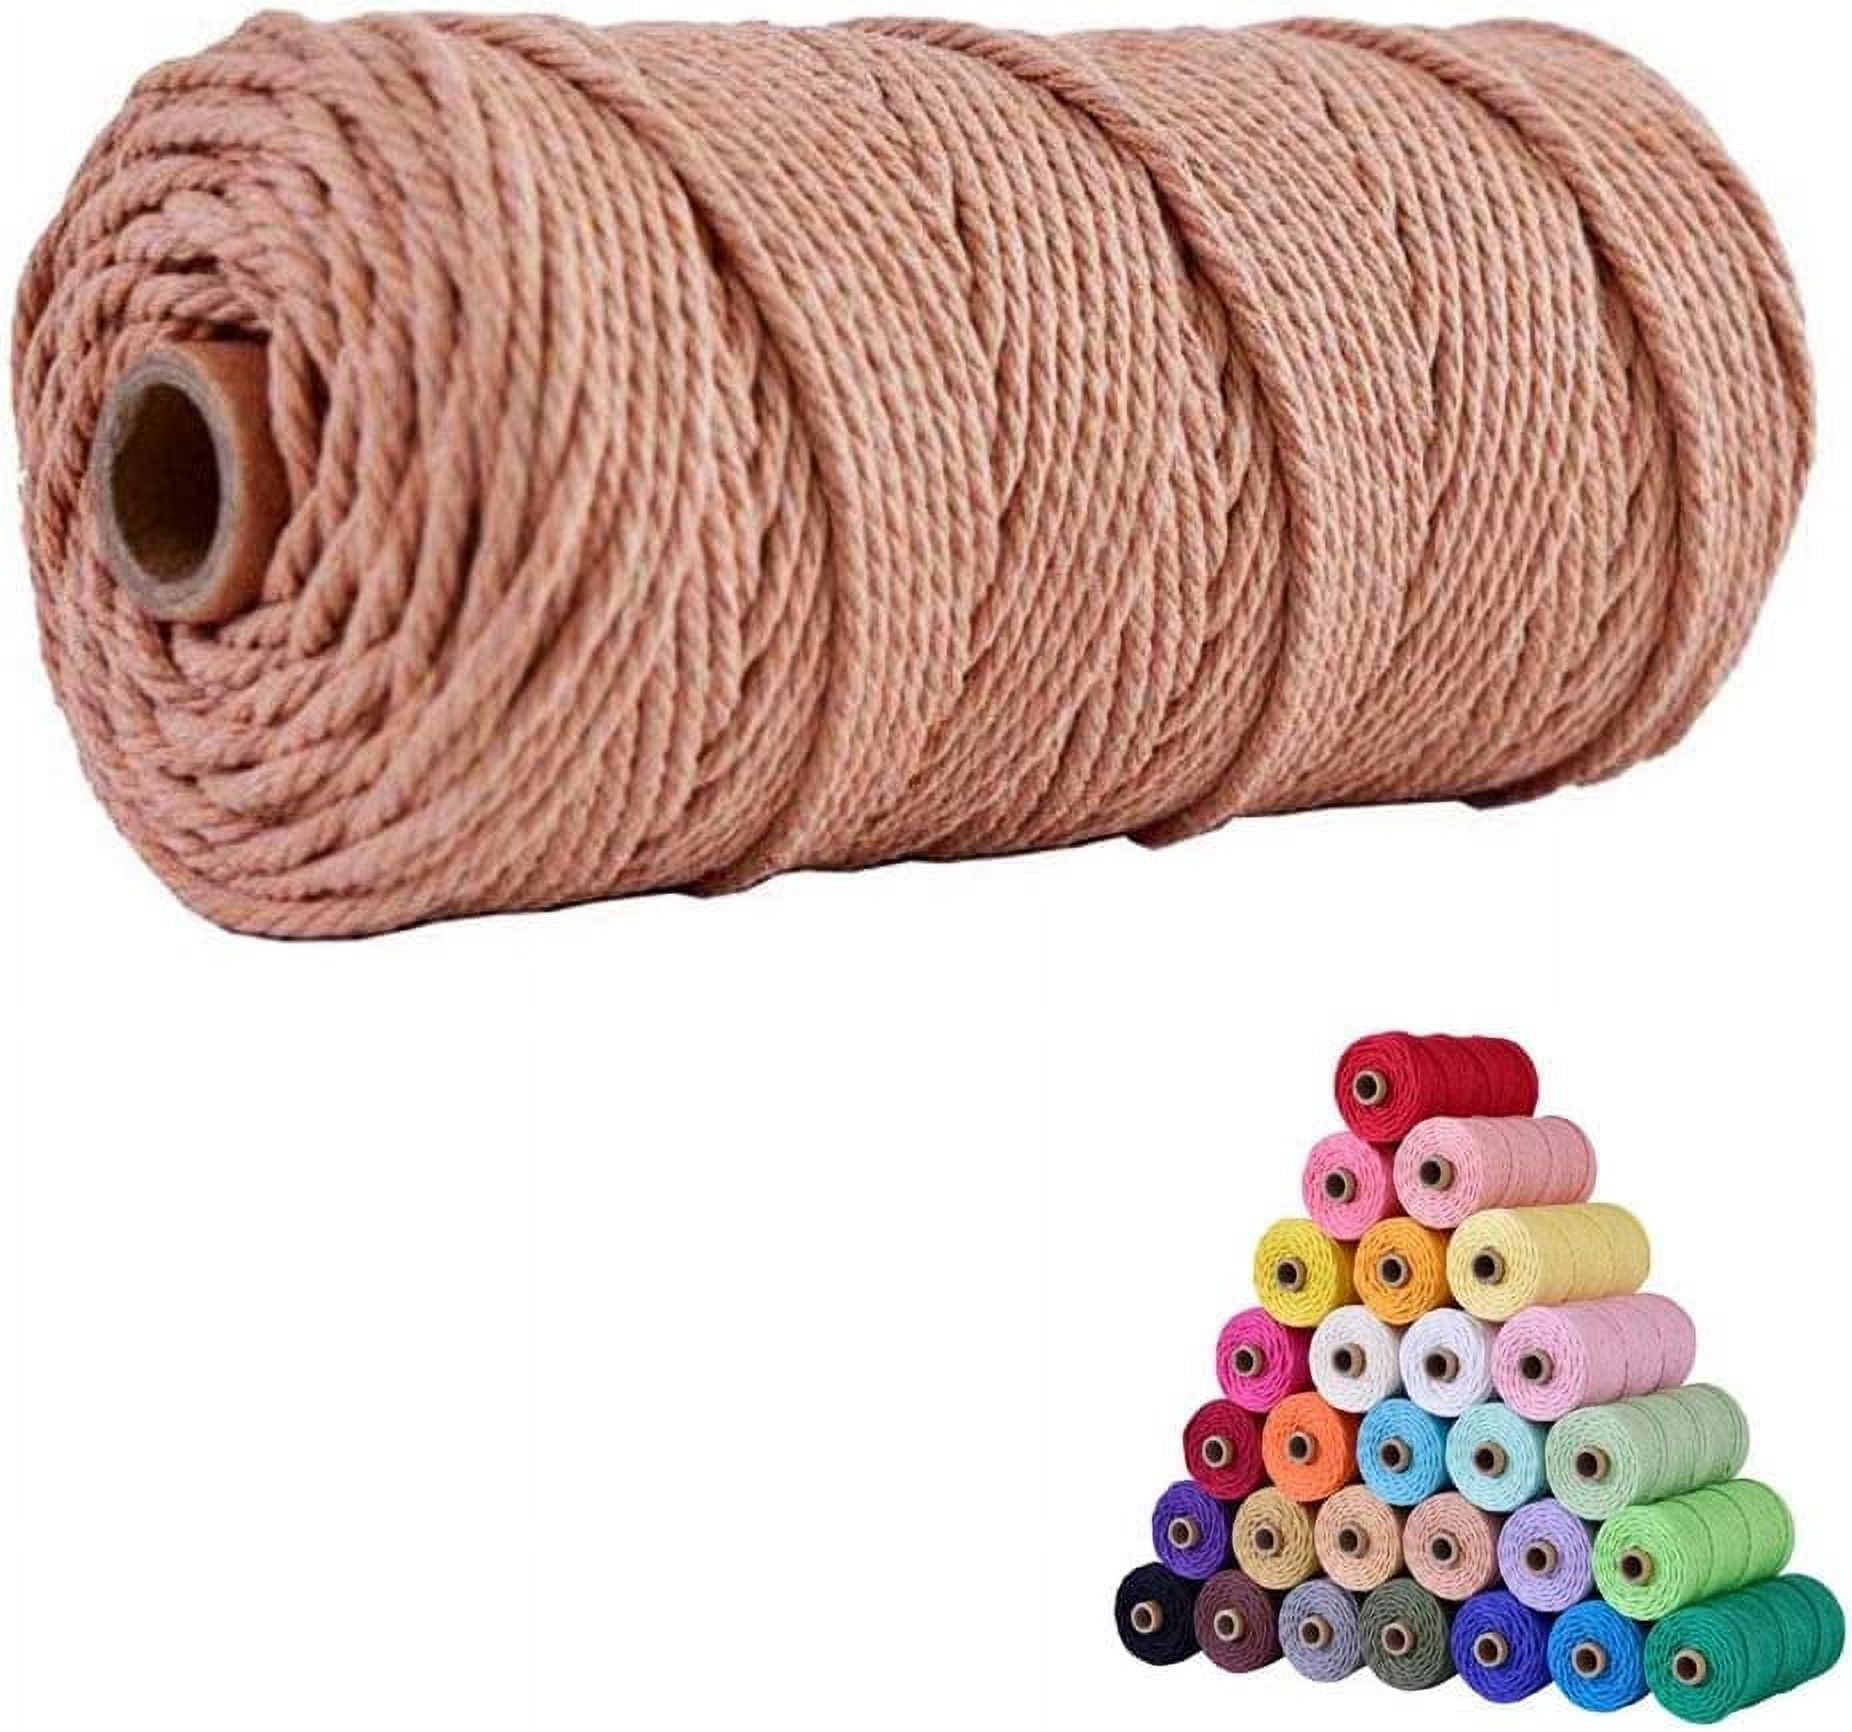 HAPYLY Macrame Cord Natual Macrame Cotton Cord DIY Craft Cord Spool Twine Rustic String Cotton Rope for Wall Hanging,Plant Hangers,Crafts,Knitting